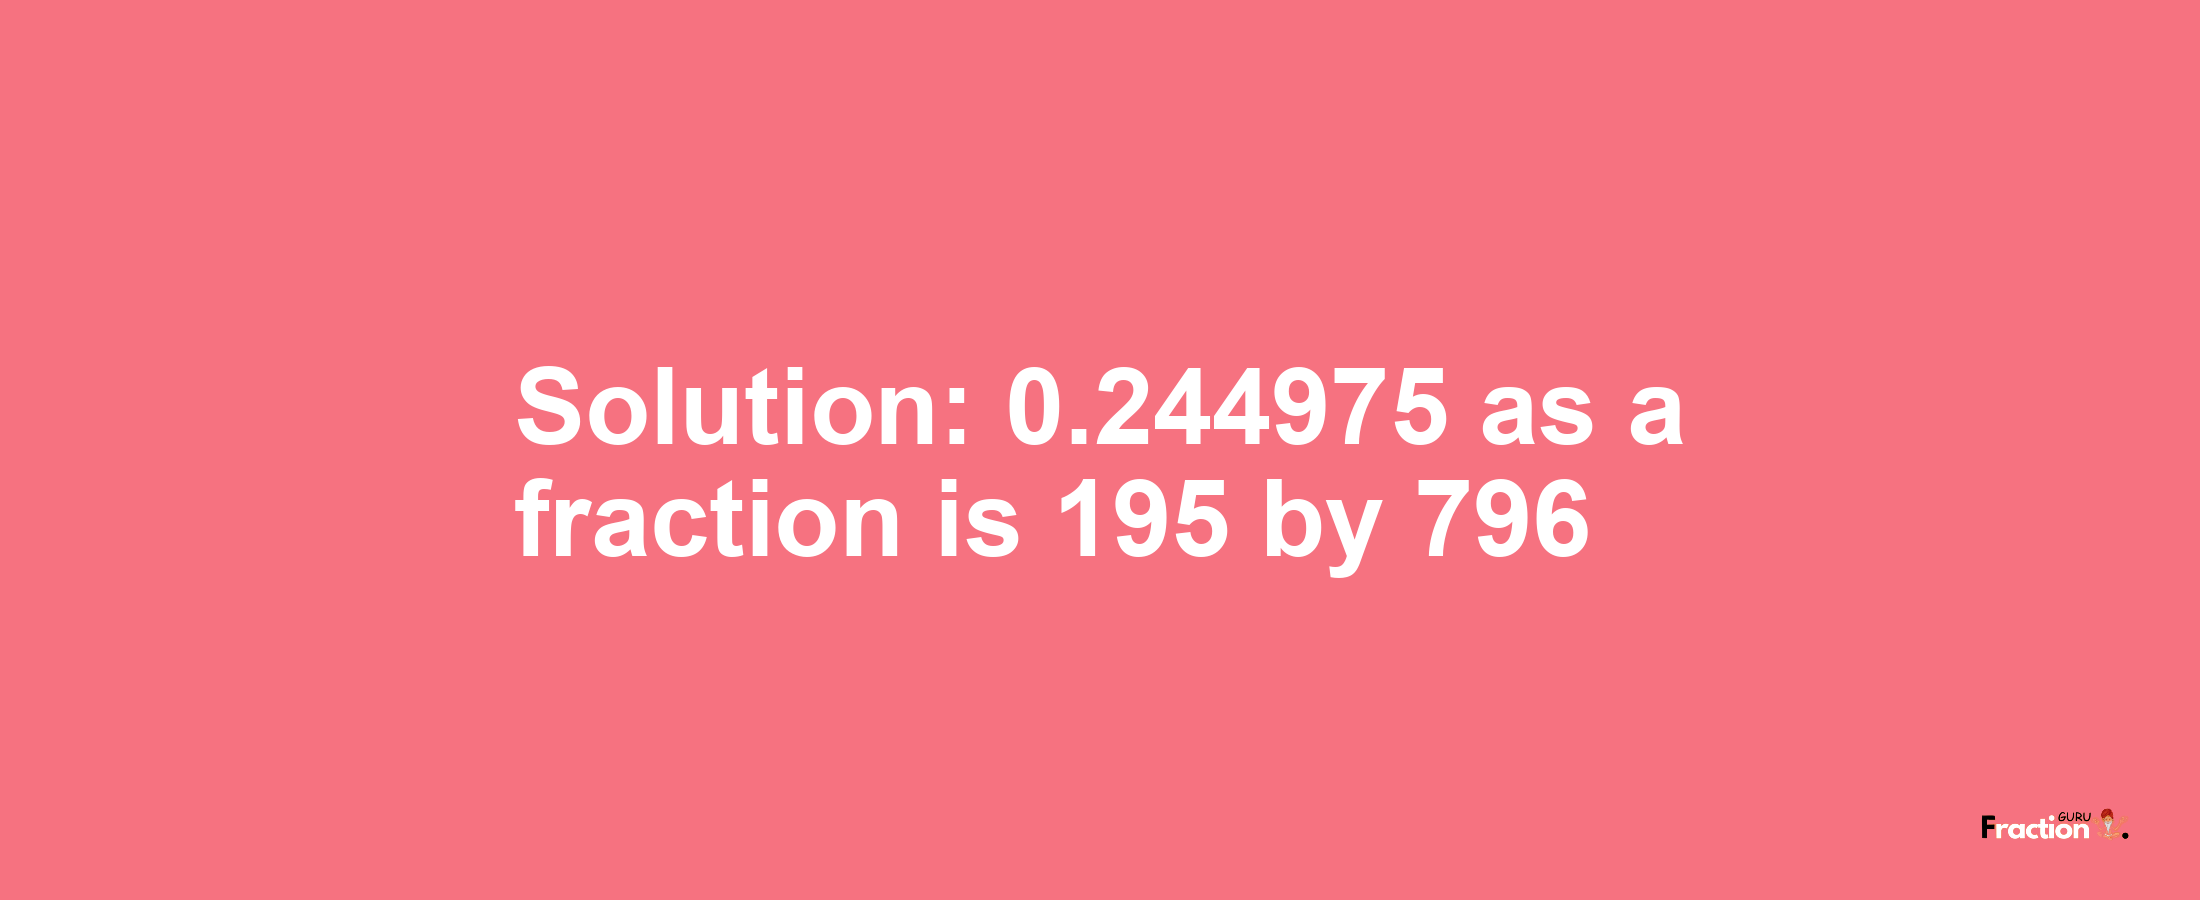 Solution:0.244975 as a fraction is 195/796